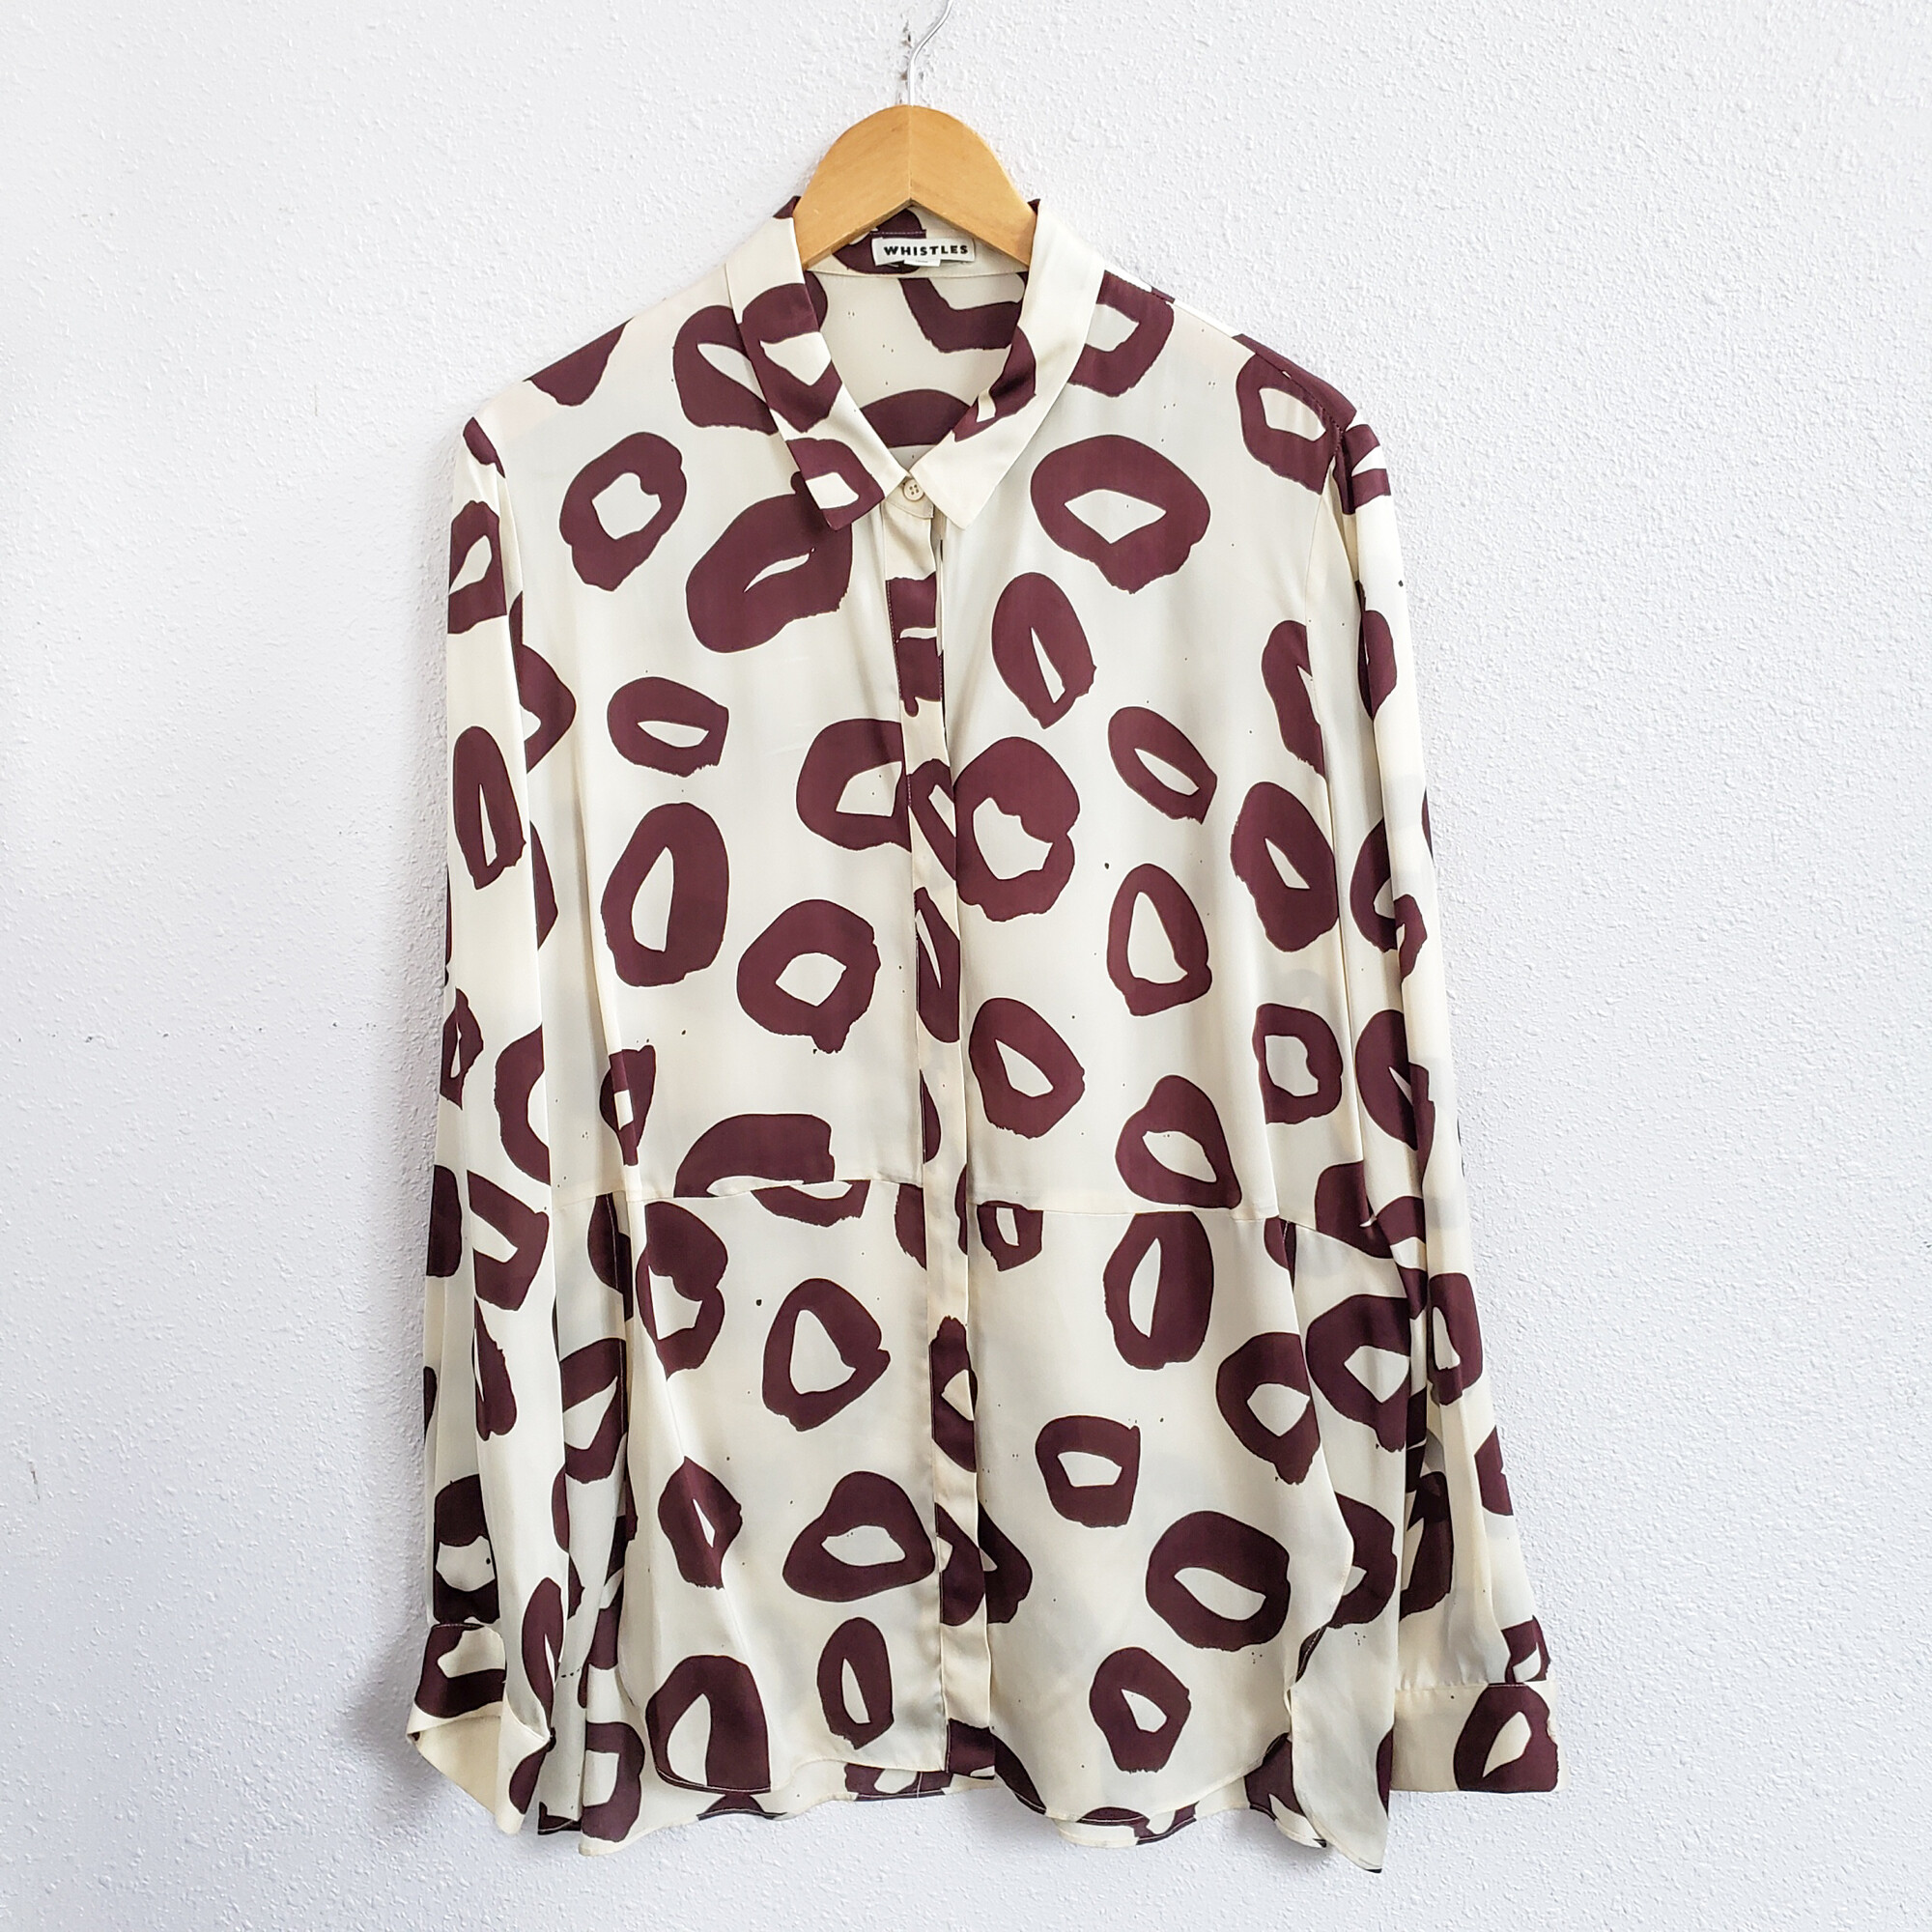 Whistles
Cream and brown print
Size: 12